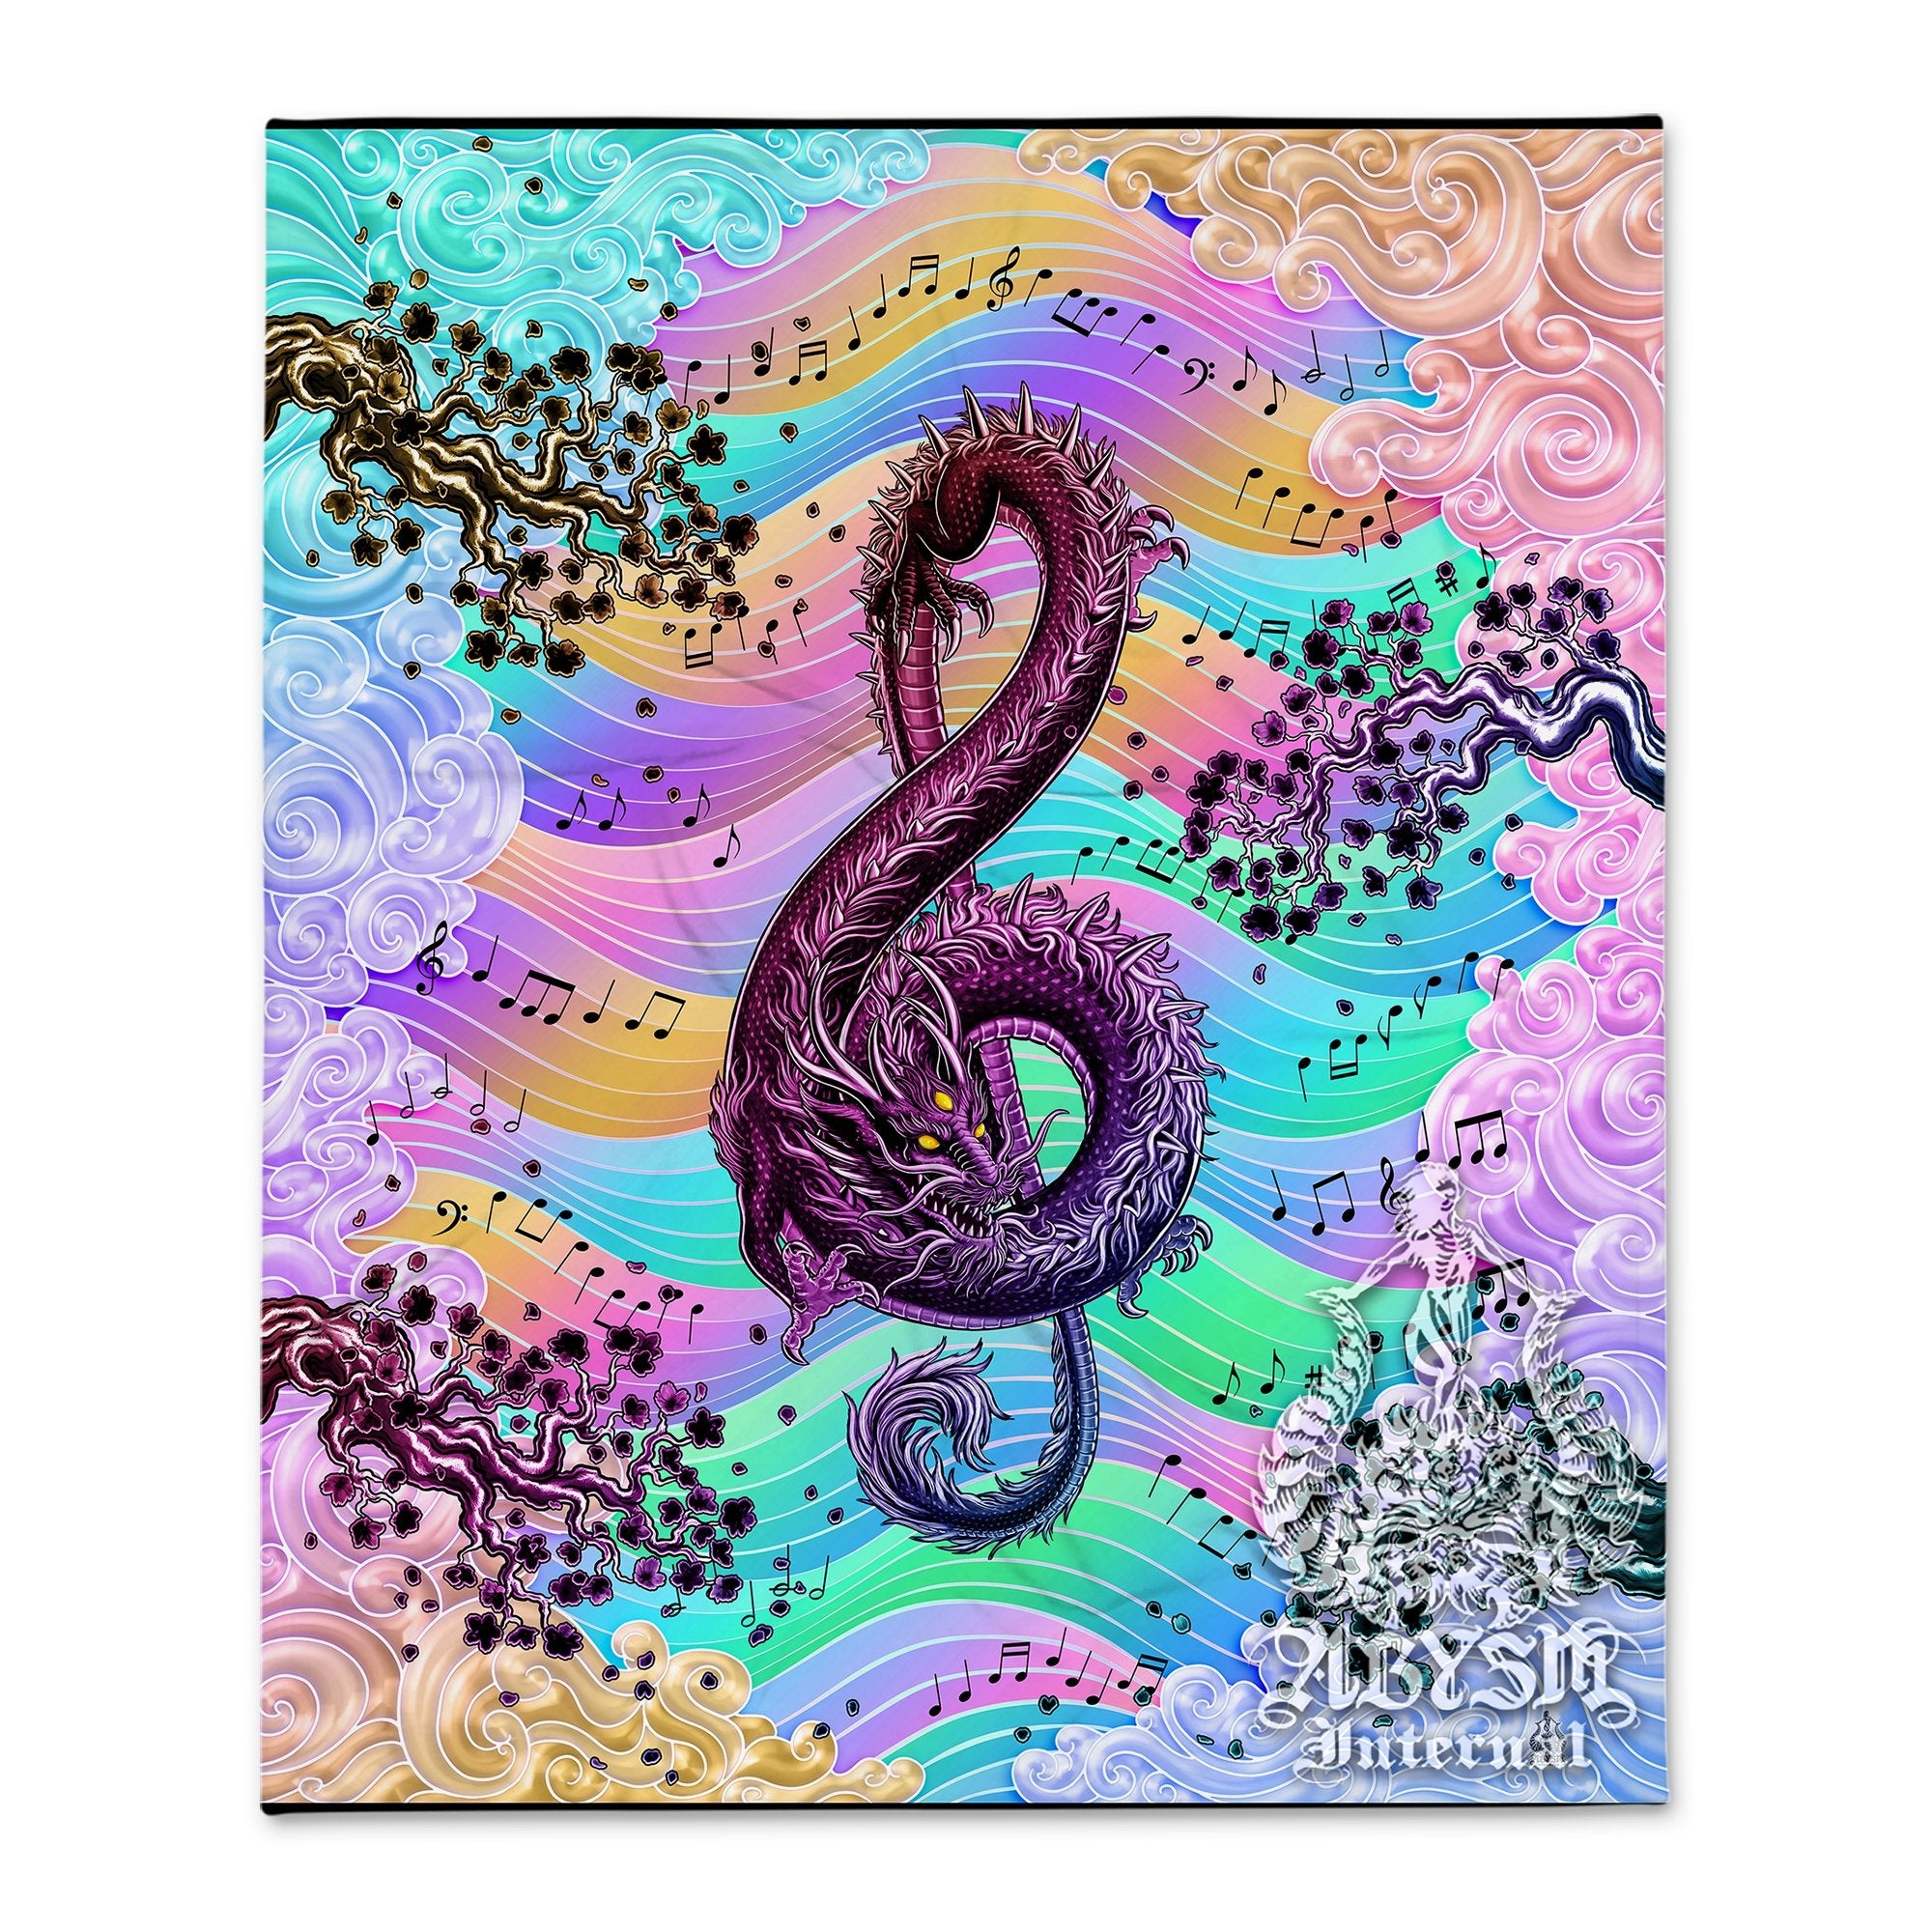 Holographic Tapestry, Music Wall Hanging, Aesthetic Home Decor, Art Print, Eclectic and Funky - Pastel Punk Dragon, Yume Kawaii and Fairy Kei, Treble Clef - Abysm Internal